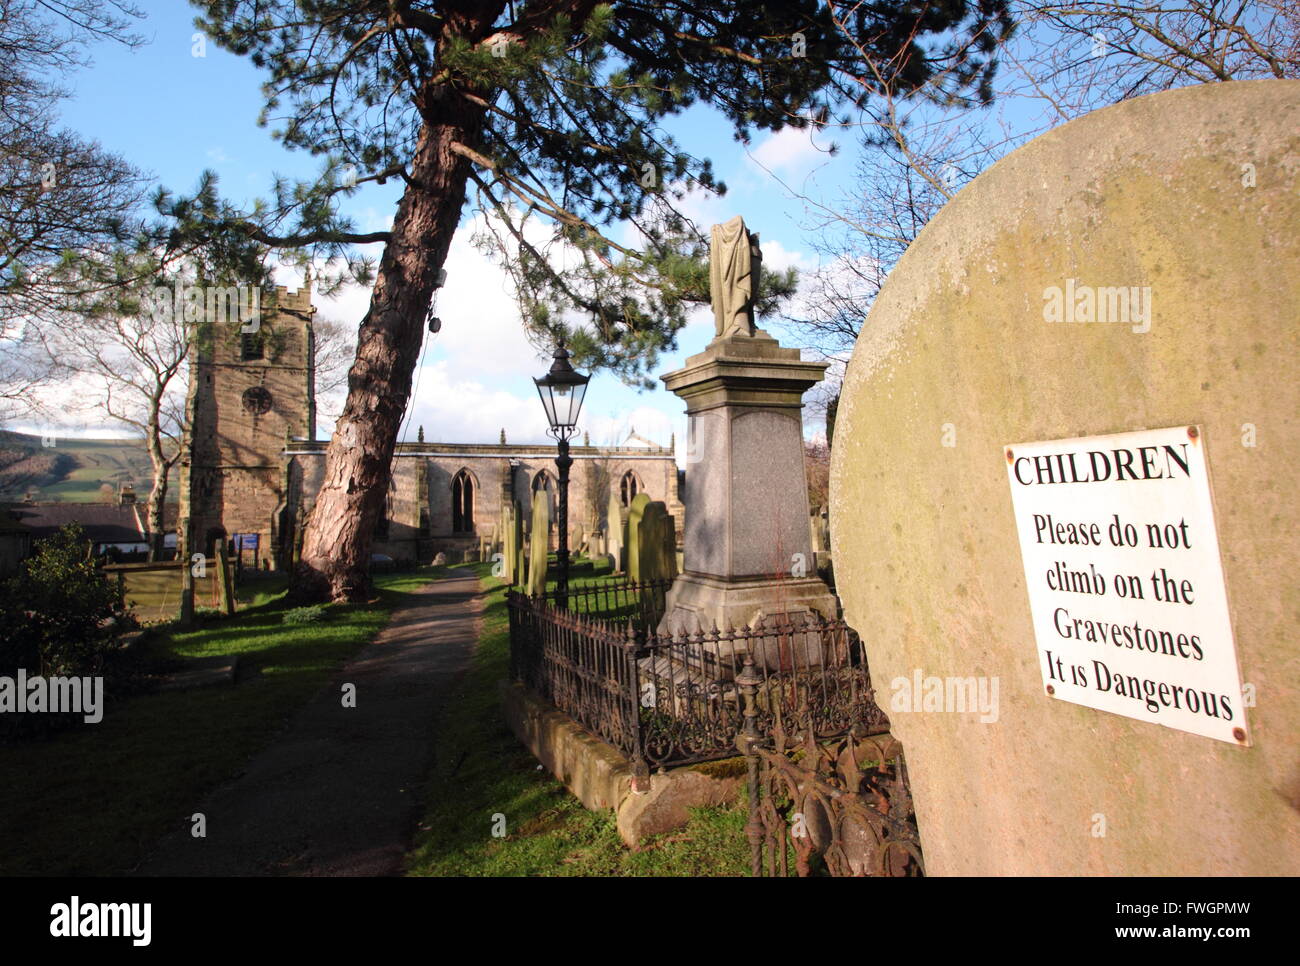 A sign in a British graveyard warns children that climbing on gravestones is dangerous - England UK, 2016 Stock Photo